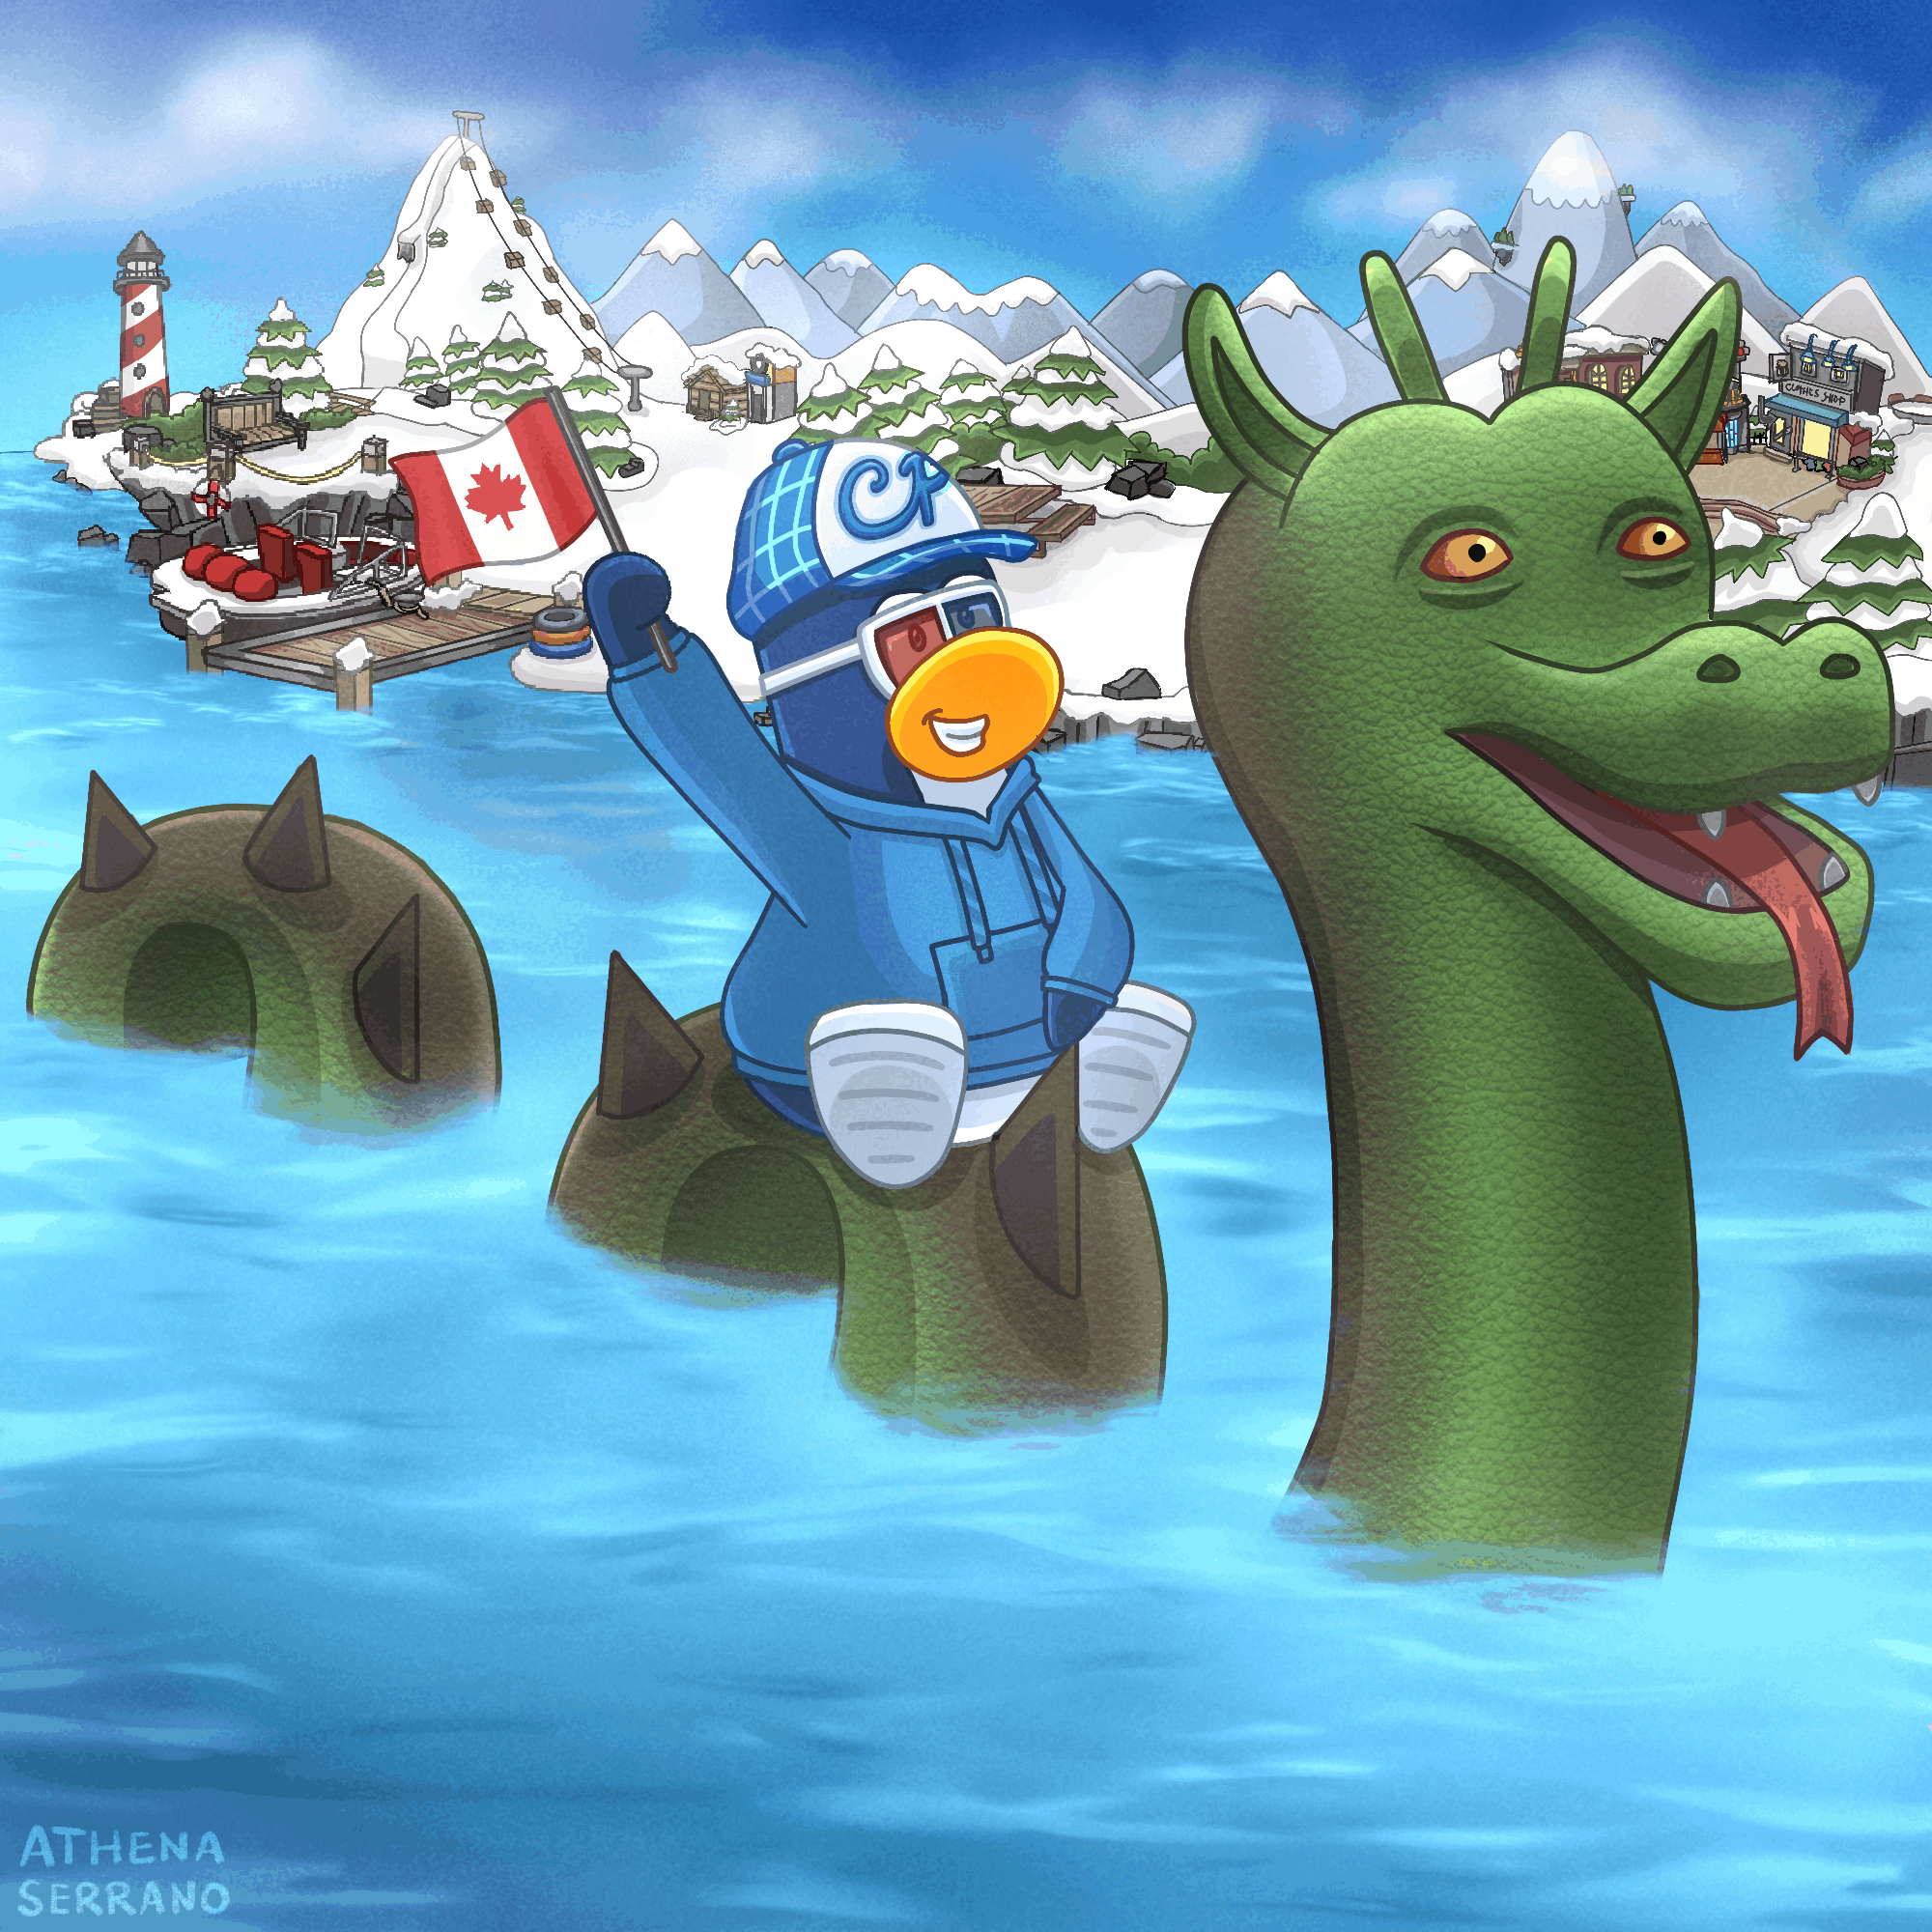 Art commission for Meggie/Tech70 by Athena Serrano/Cw700. Tech70 the blue penguin is riding on the back of the Ogopogo First Nations mythical sea creature rumored to swim in the Okanagan Lake in the shores of the island of Club Penguin with the Dock, Ski Hill, and Town. 